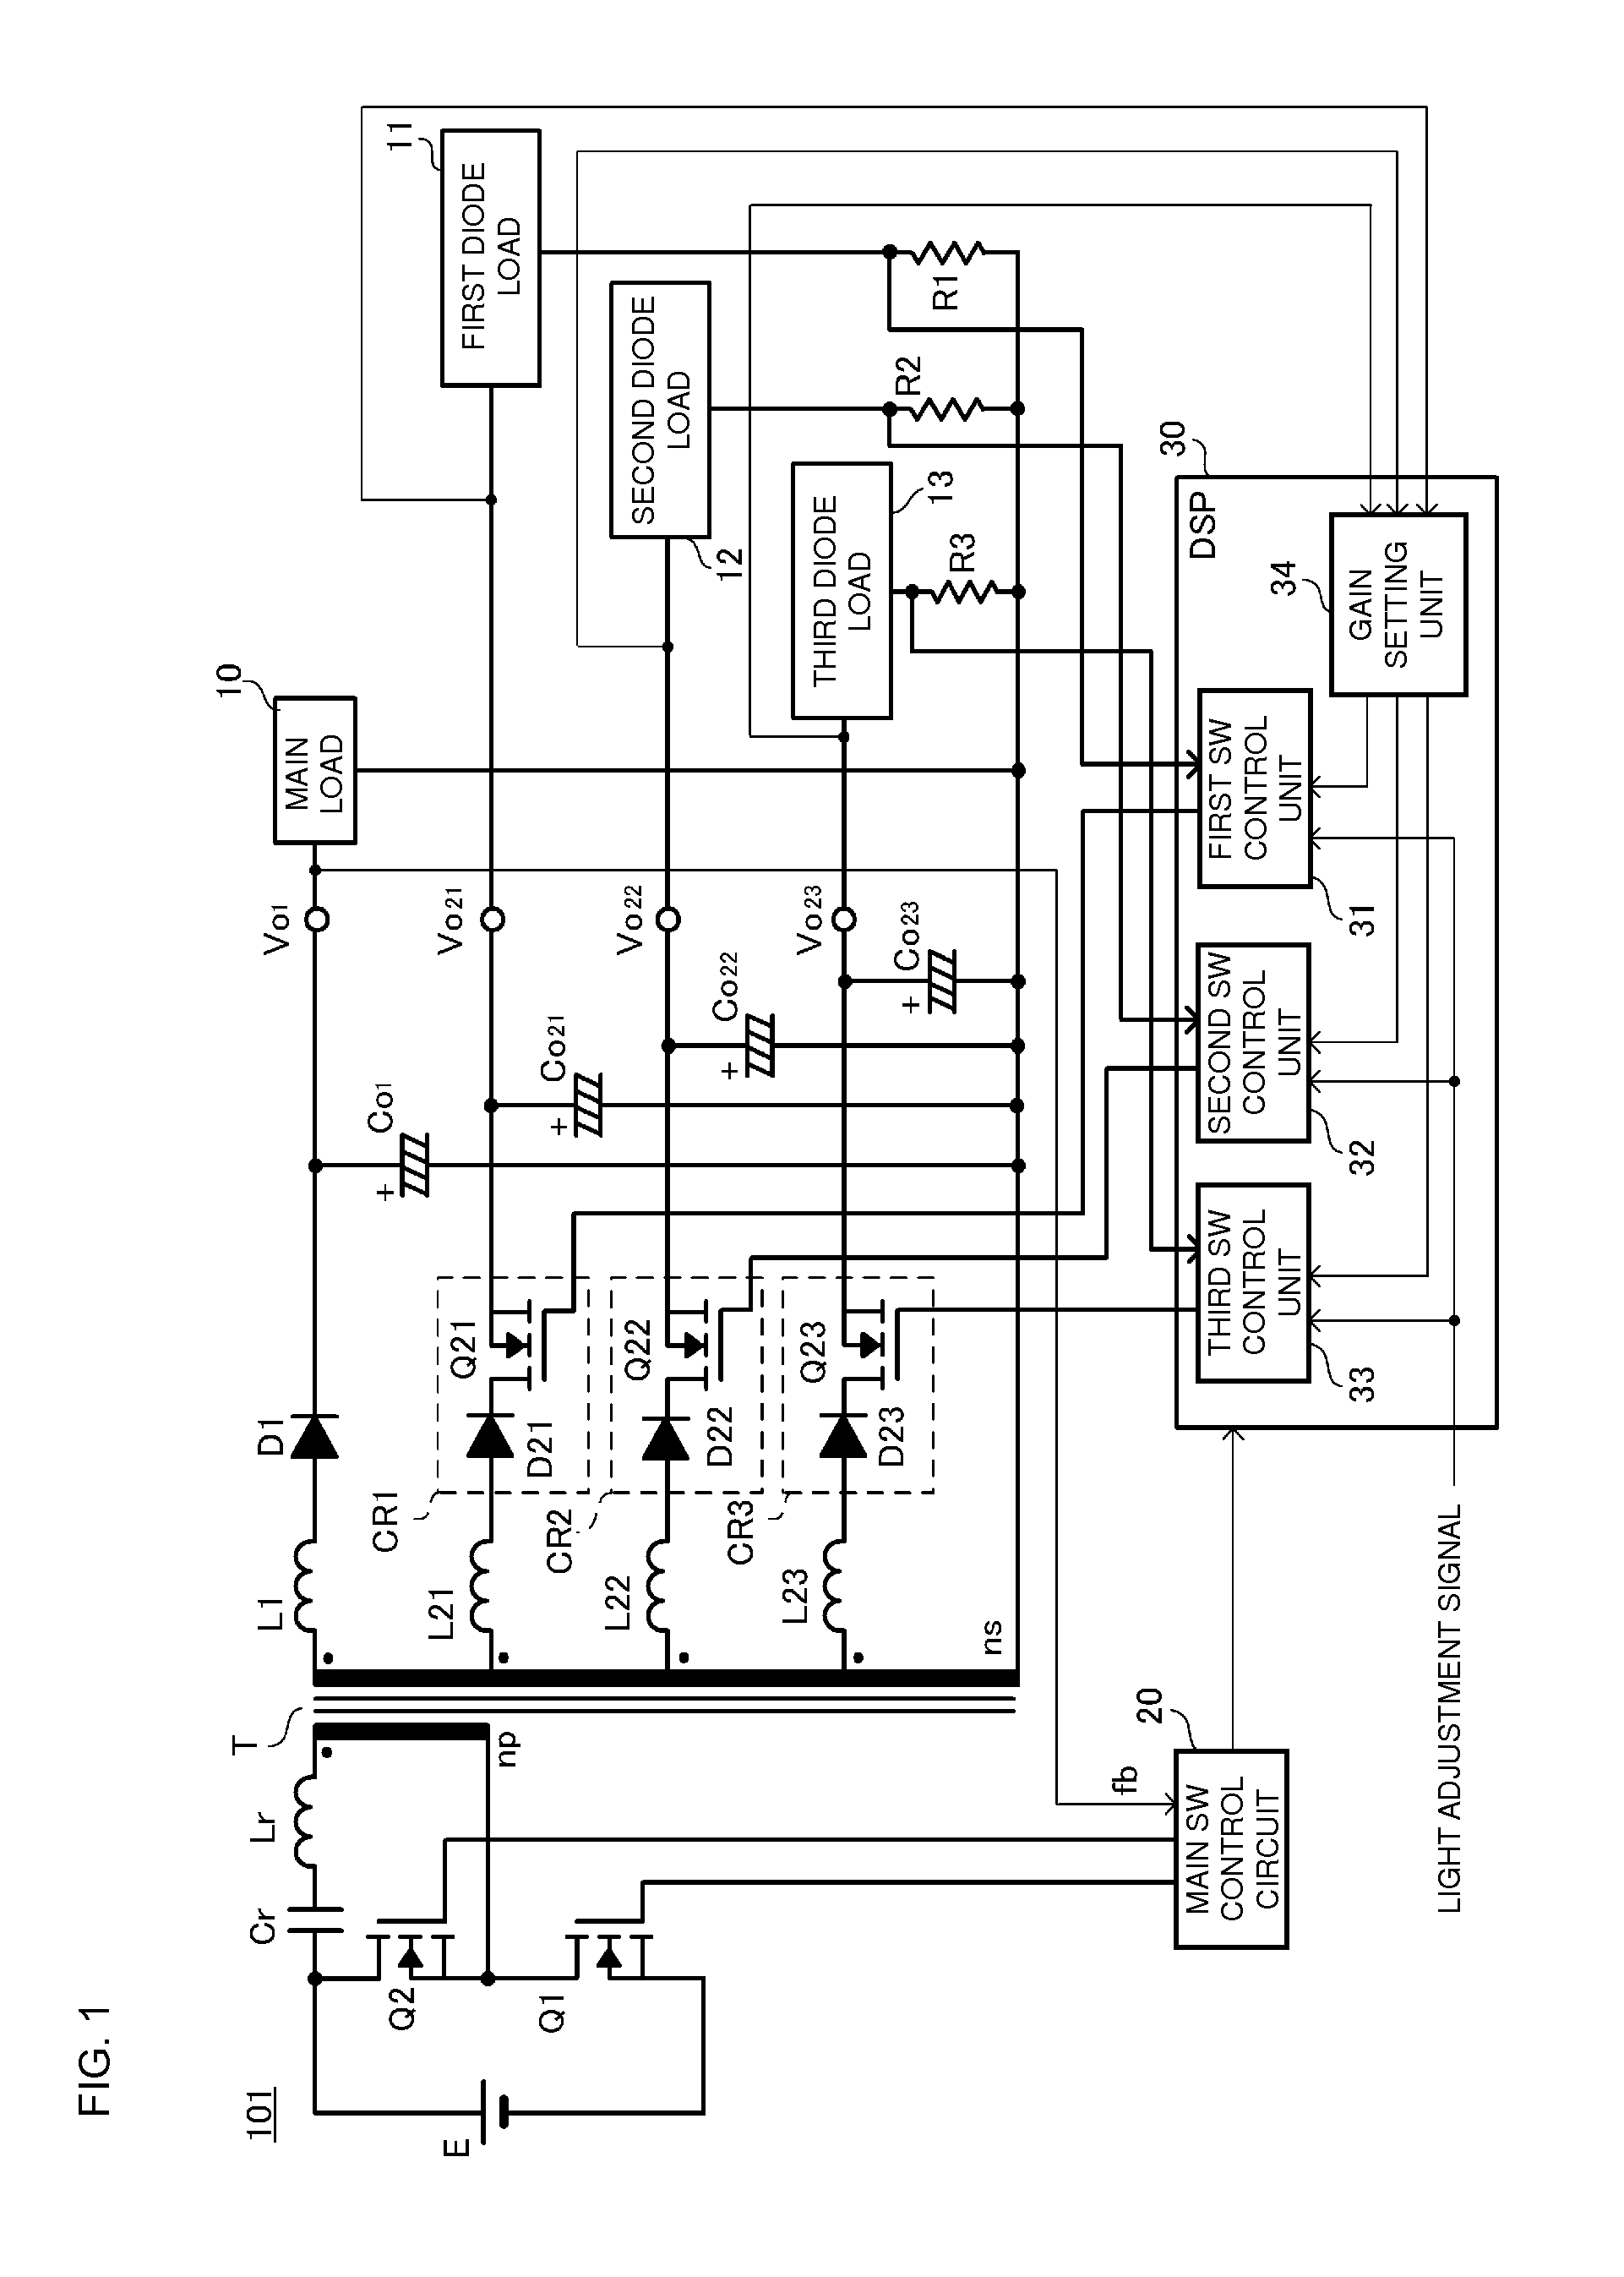 Diode load driving power supply apparatus